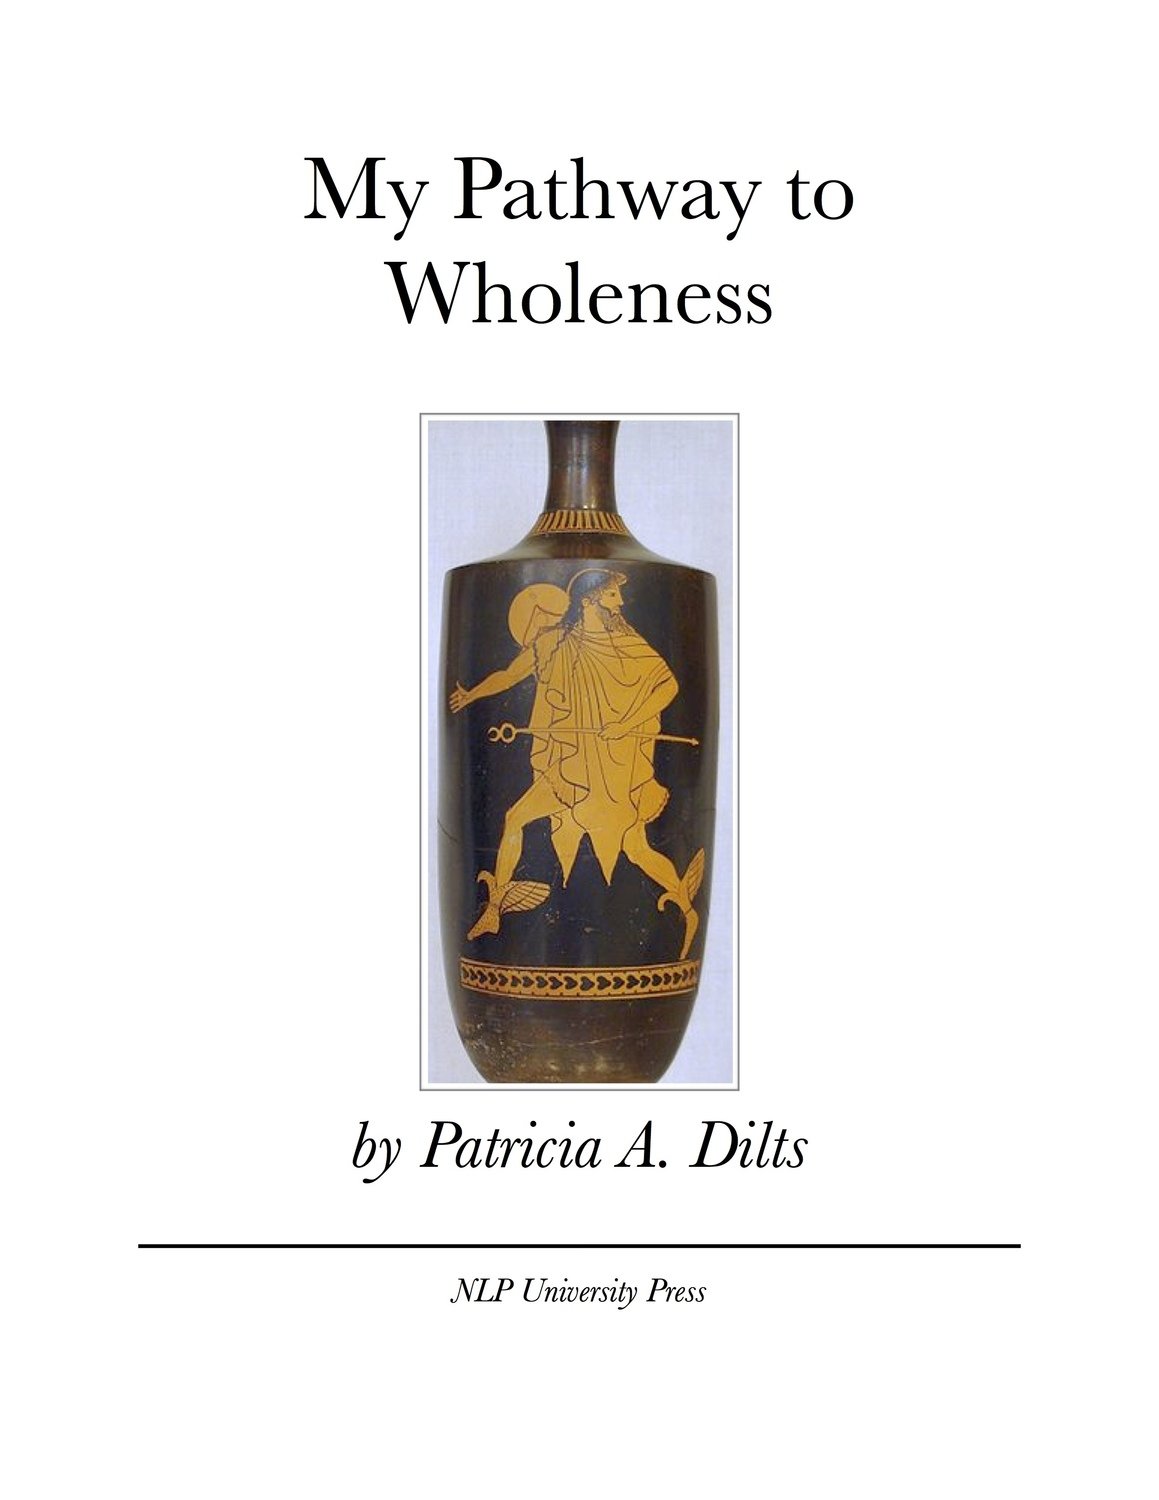 My Pathway to Wholeness by Patricia A. Dilts [Booklet]